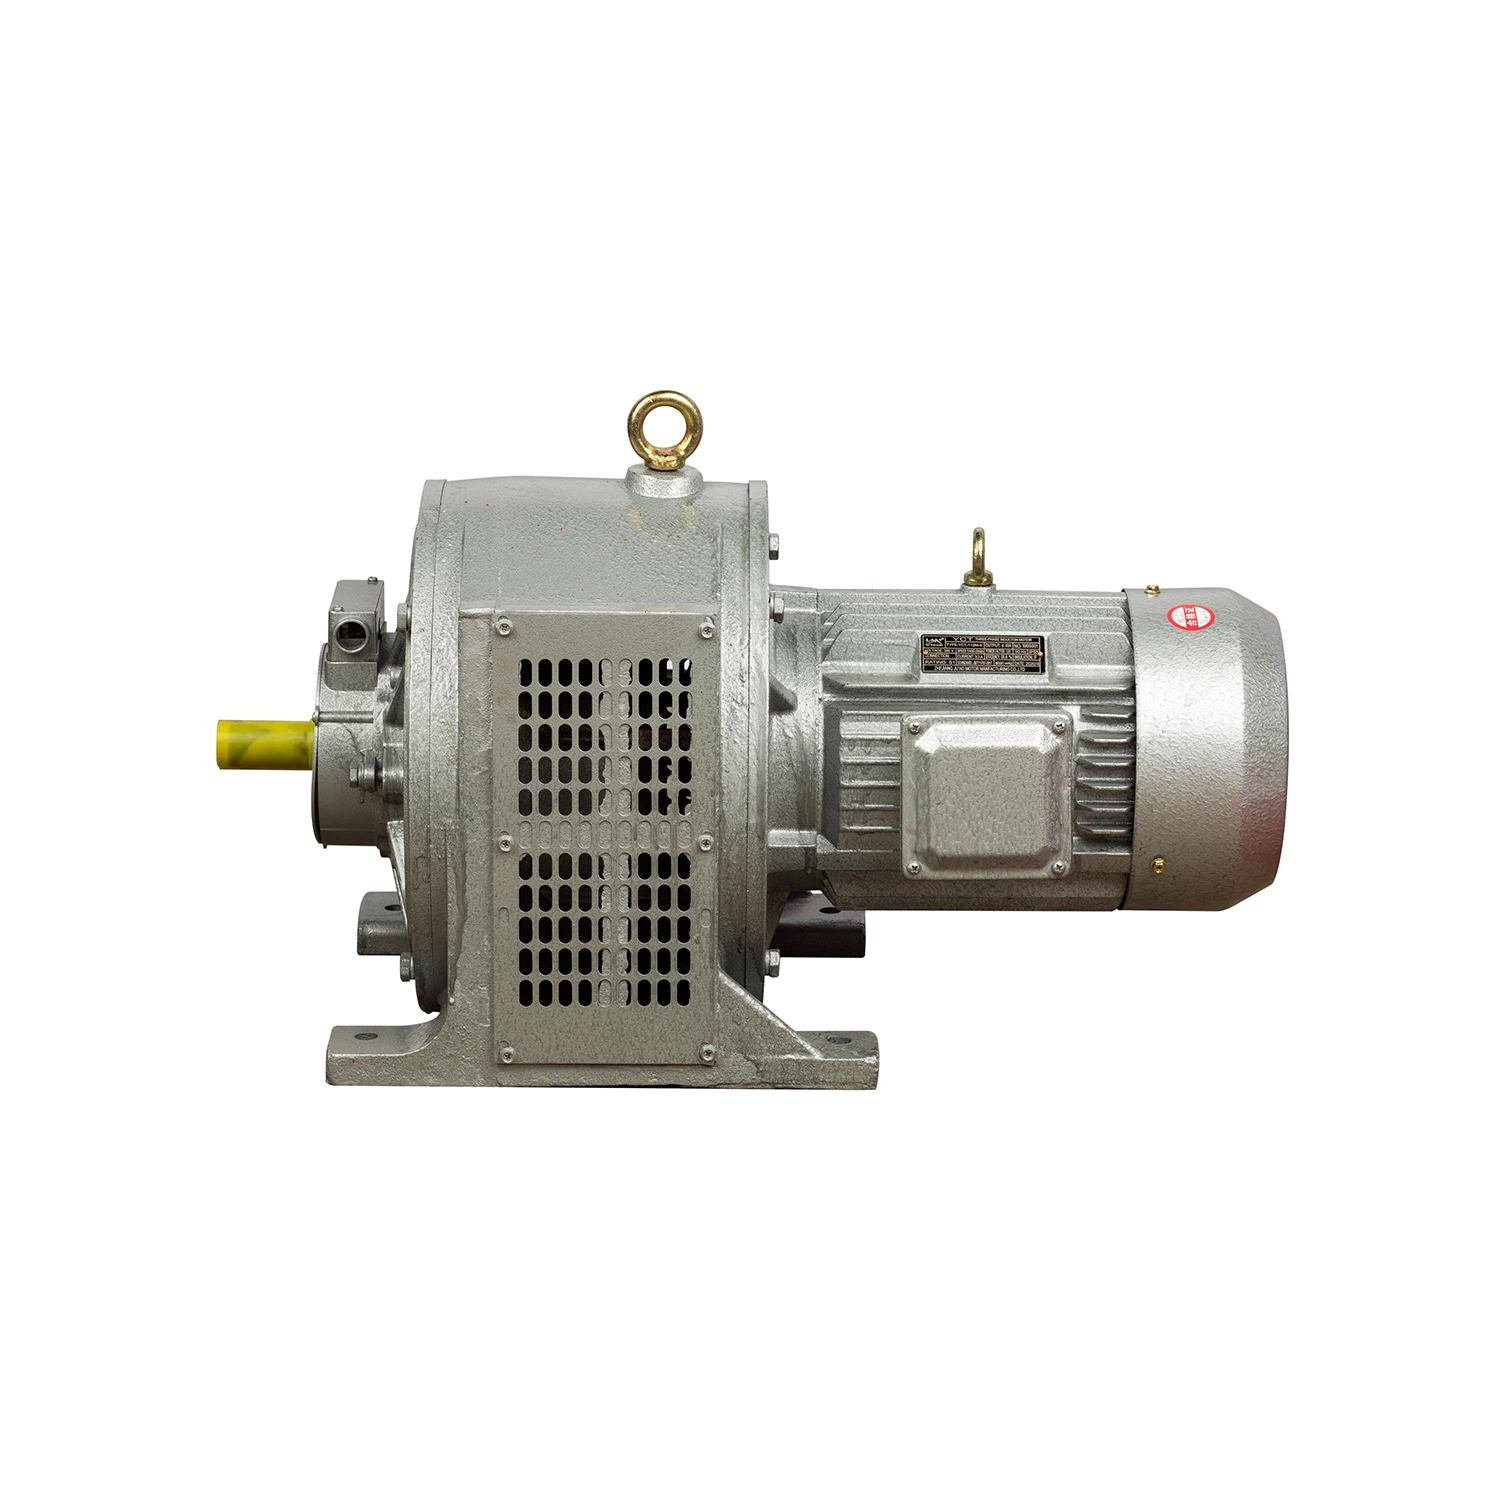 Ie2 Ie3 High Efficiency Three Phase AC Asynchronous Motor for Water Pump, Air Compressor Geared Motor